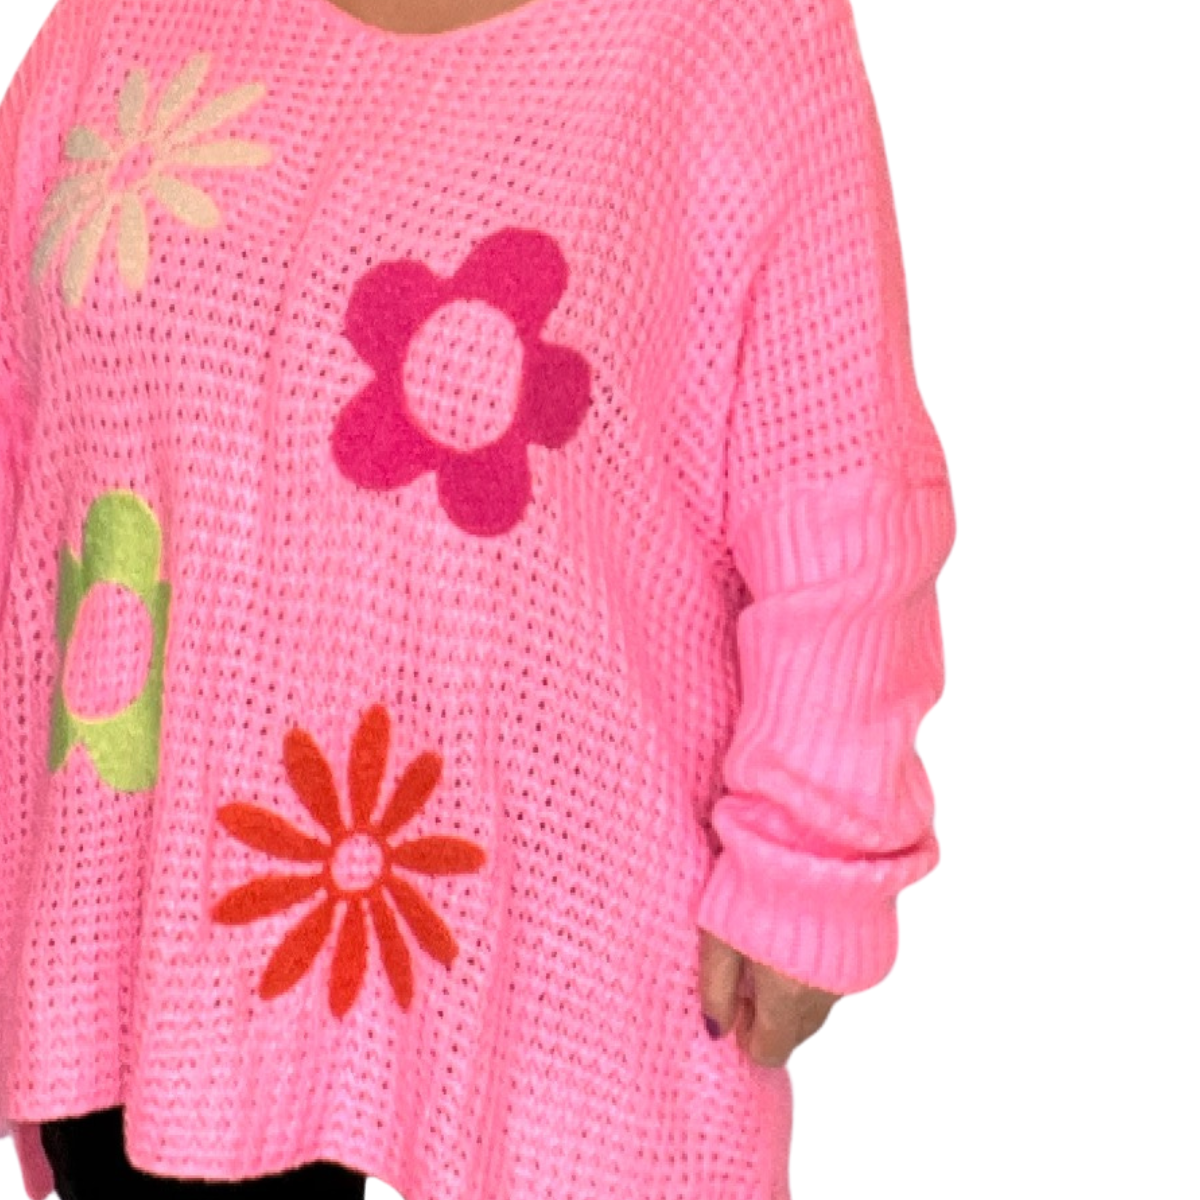 V NECK JUMPER WITH APPLIQUE HIPPY STYLE FLOWERS